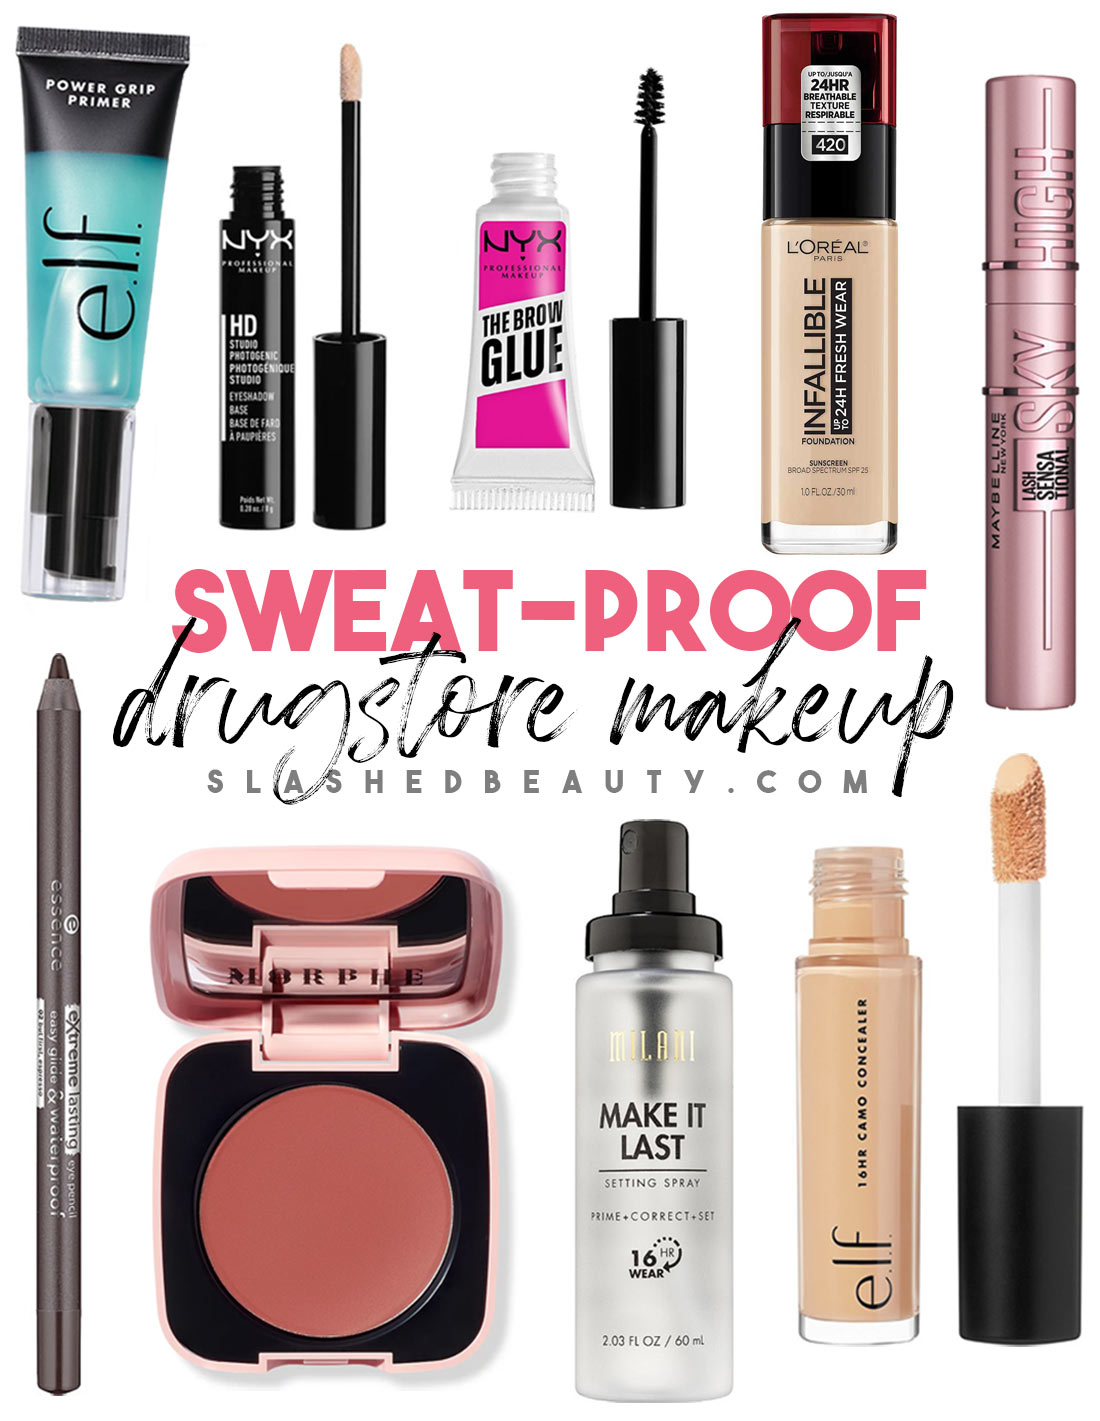 Sved lur Elskede Best Sweat Proof Drugstore Makeup that Even Humidity Won't Ruin | Slashed  Beauty